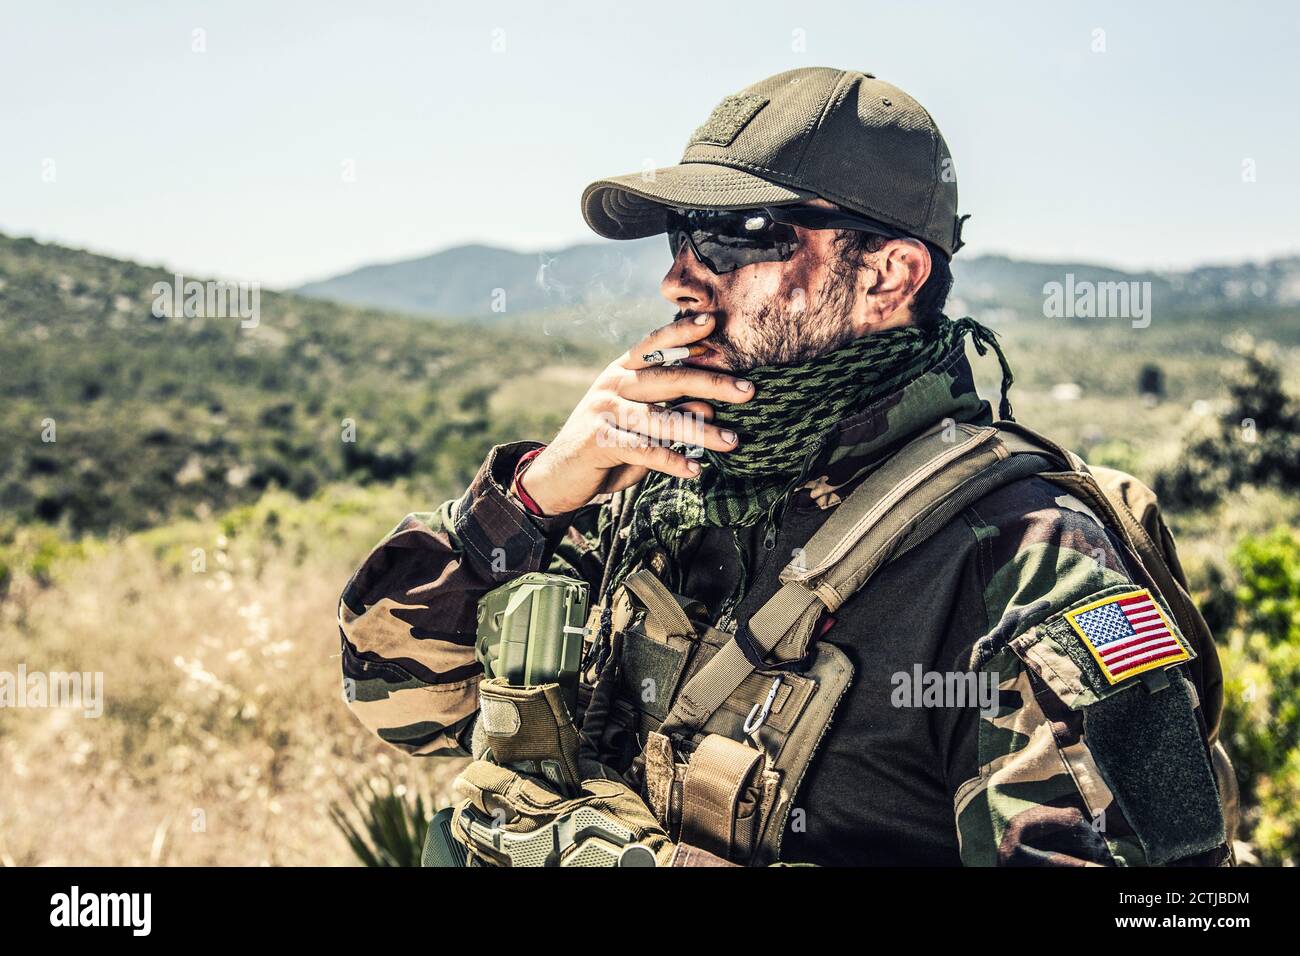 Army Special Forces Soldier Seals Fighter In Camo Uniform Shemagh Scarf Ballistic Glasses And